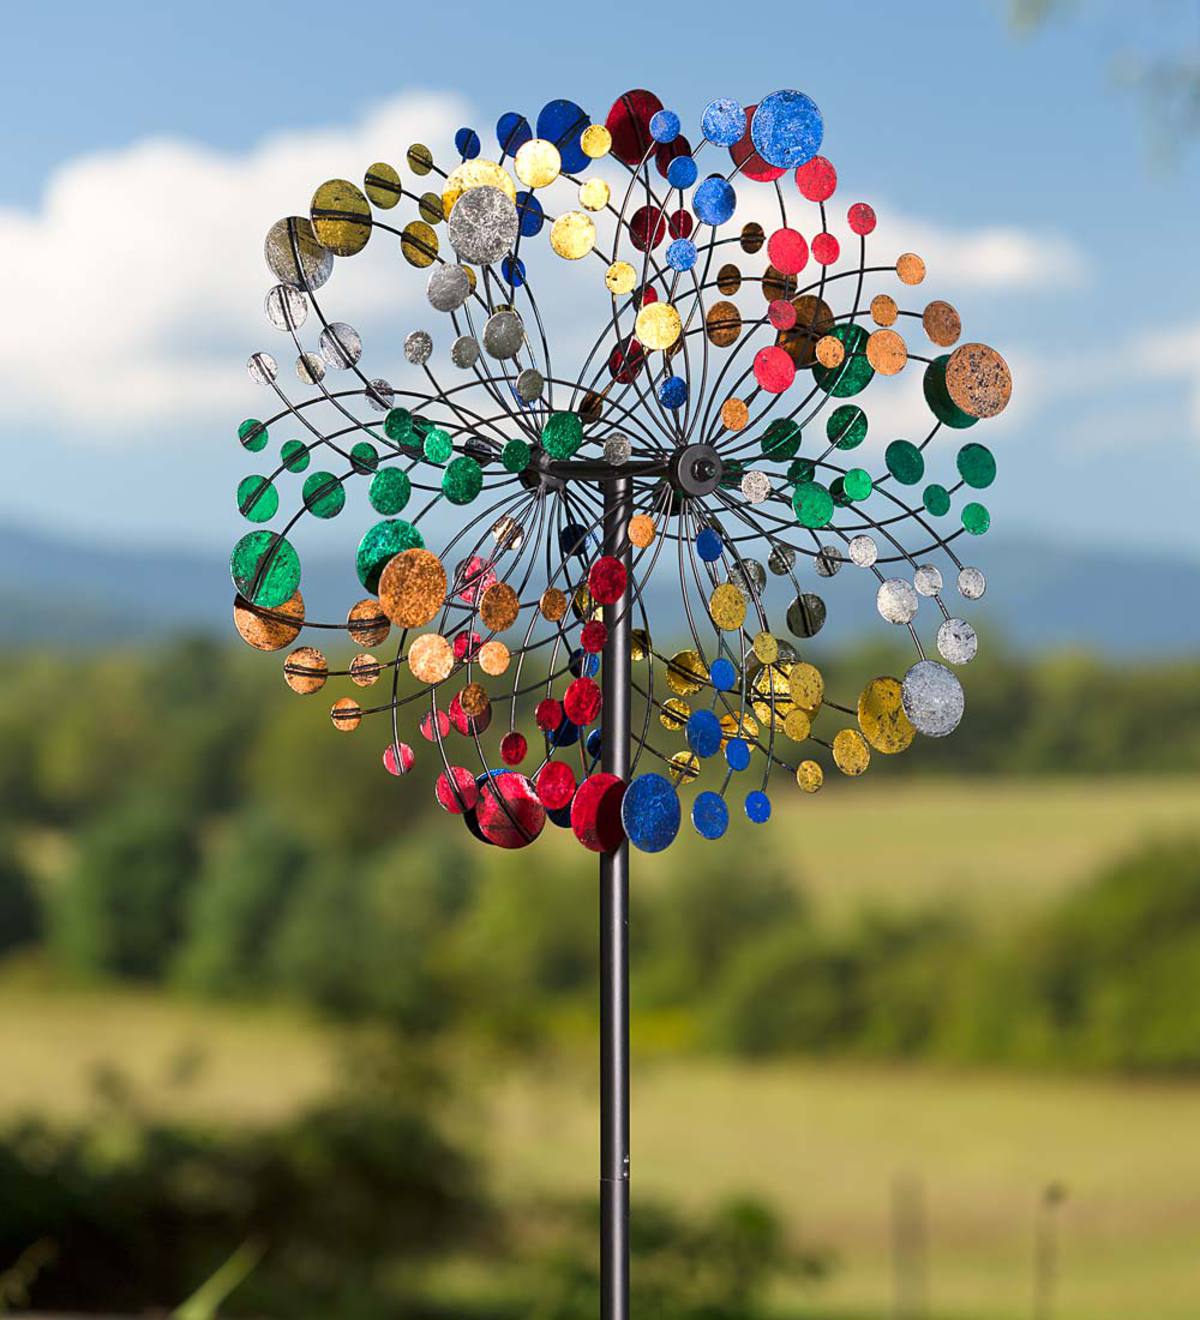 Dual-Rotor Metal Wind Spinner with Multi-Colored Metal Discs